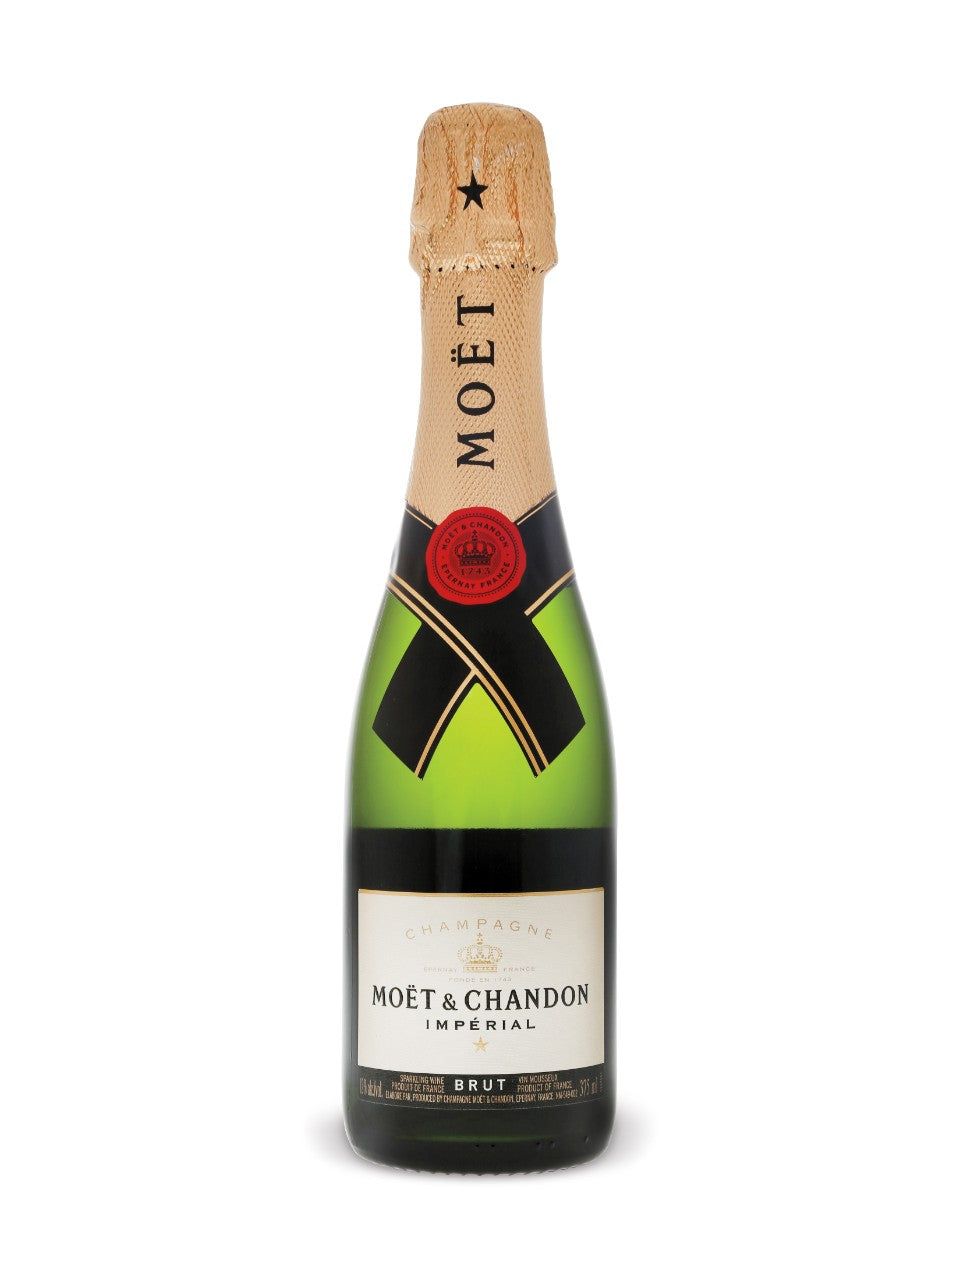 Moet & Chandon Brut Imperial 200ml (I acknowledge that I am over 19 years of age.)